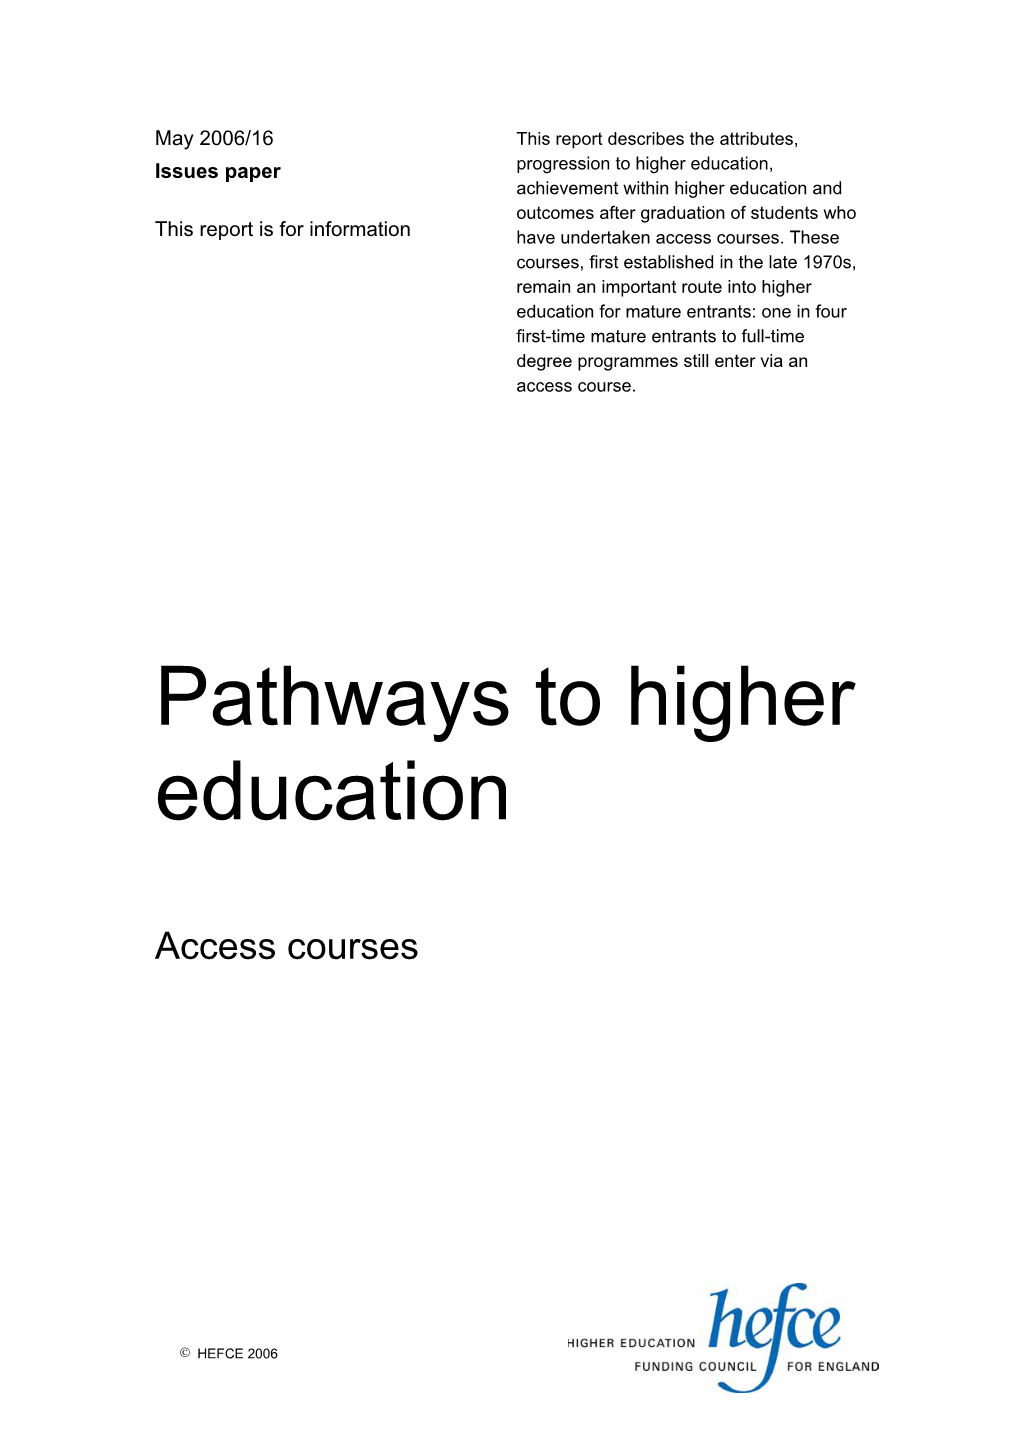 Pathways to Higher Education